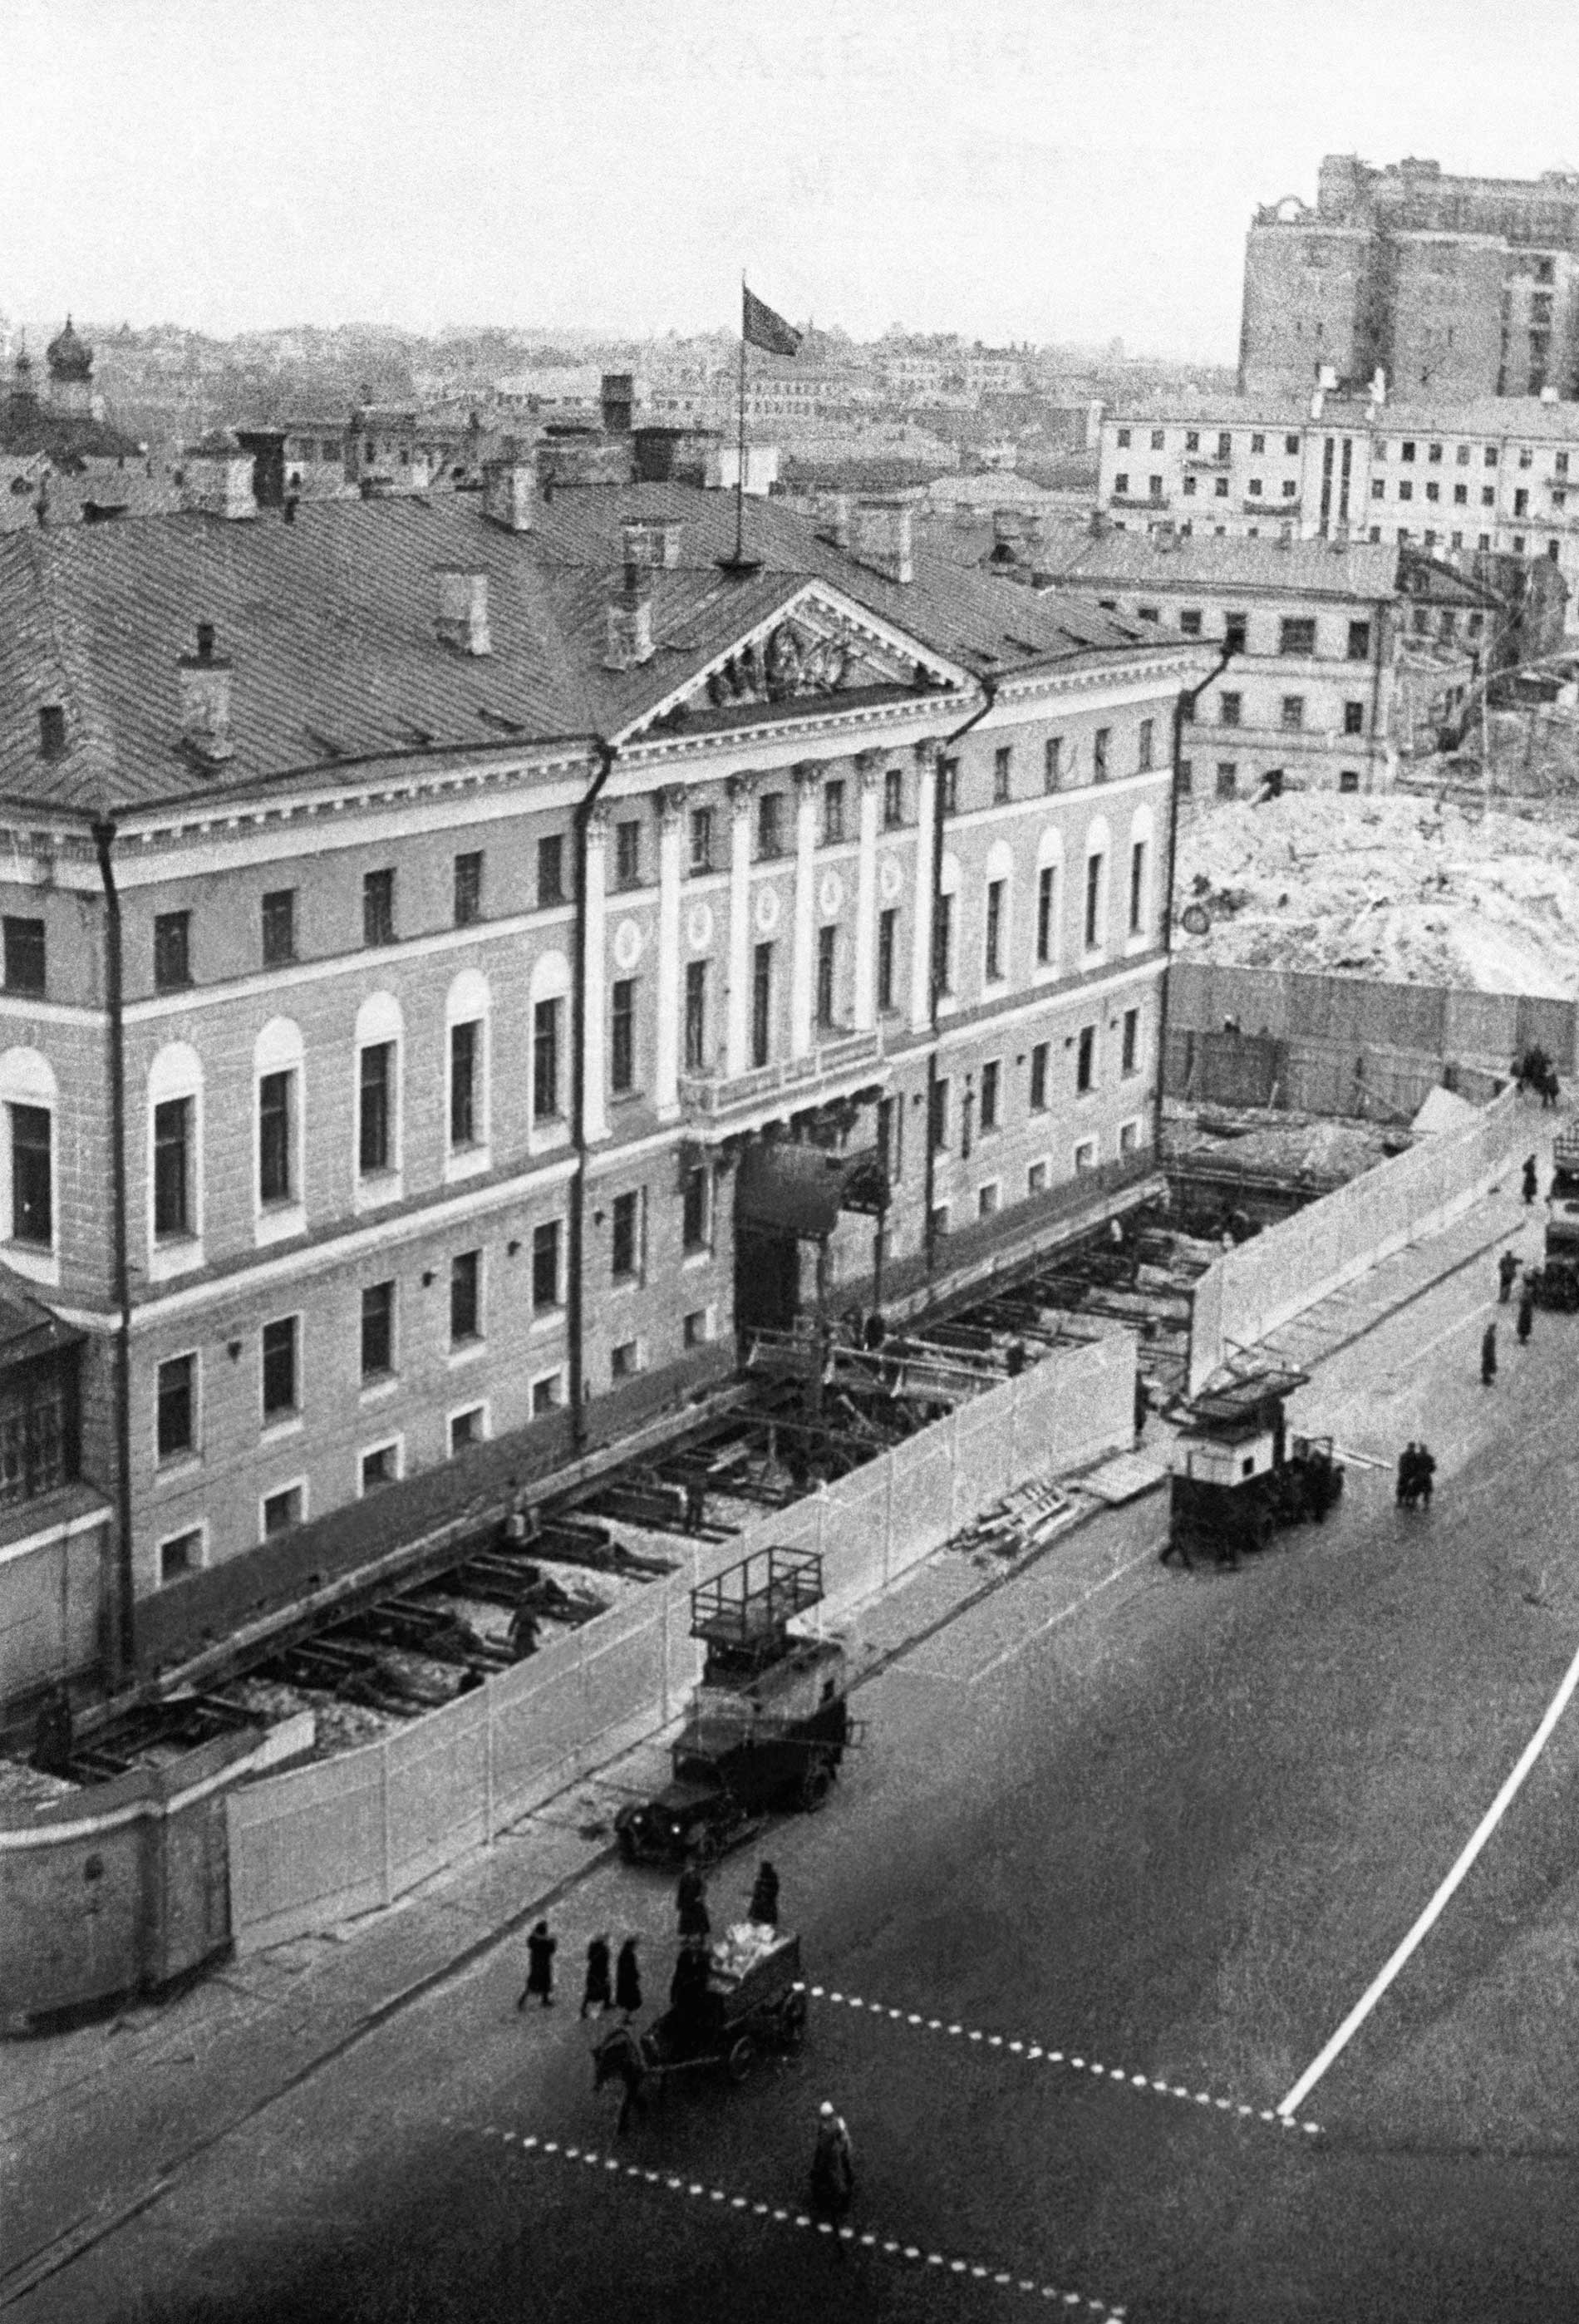 The Mossovet building, 1939